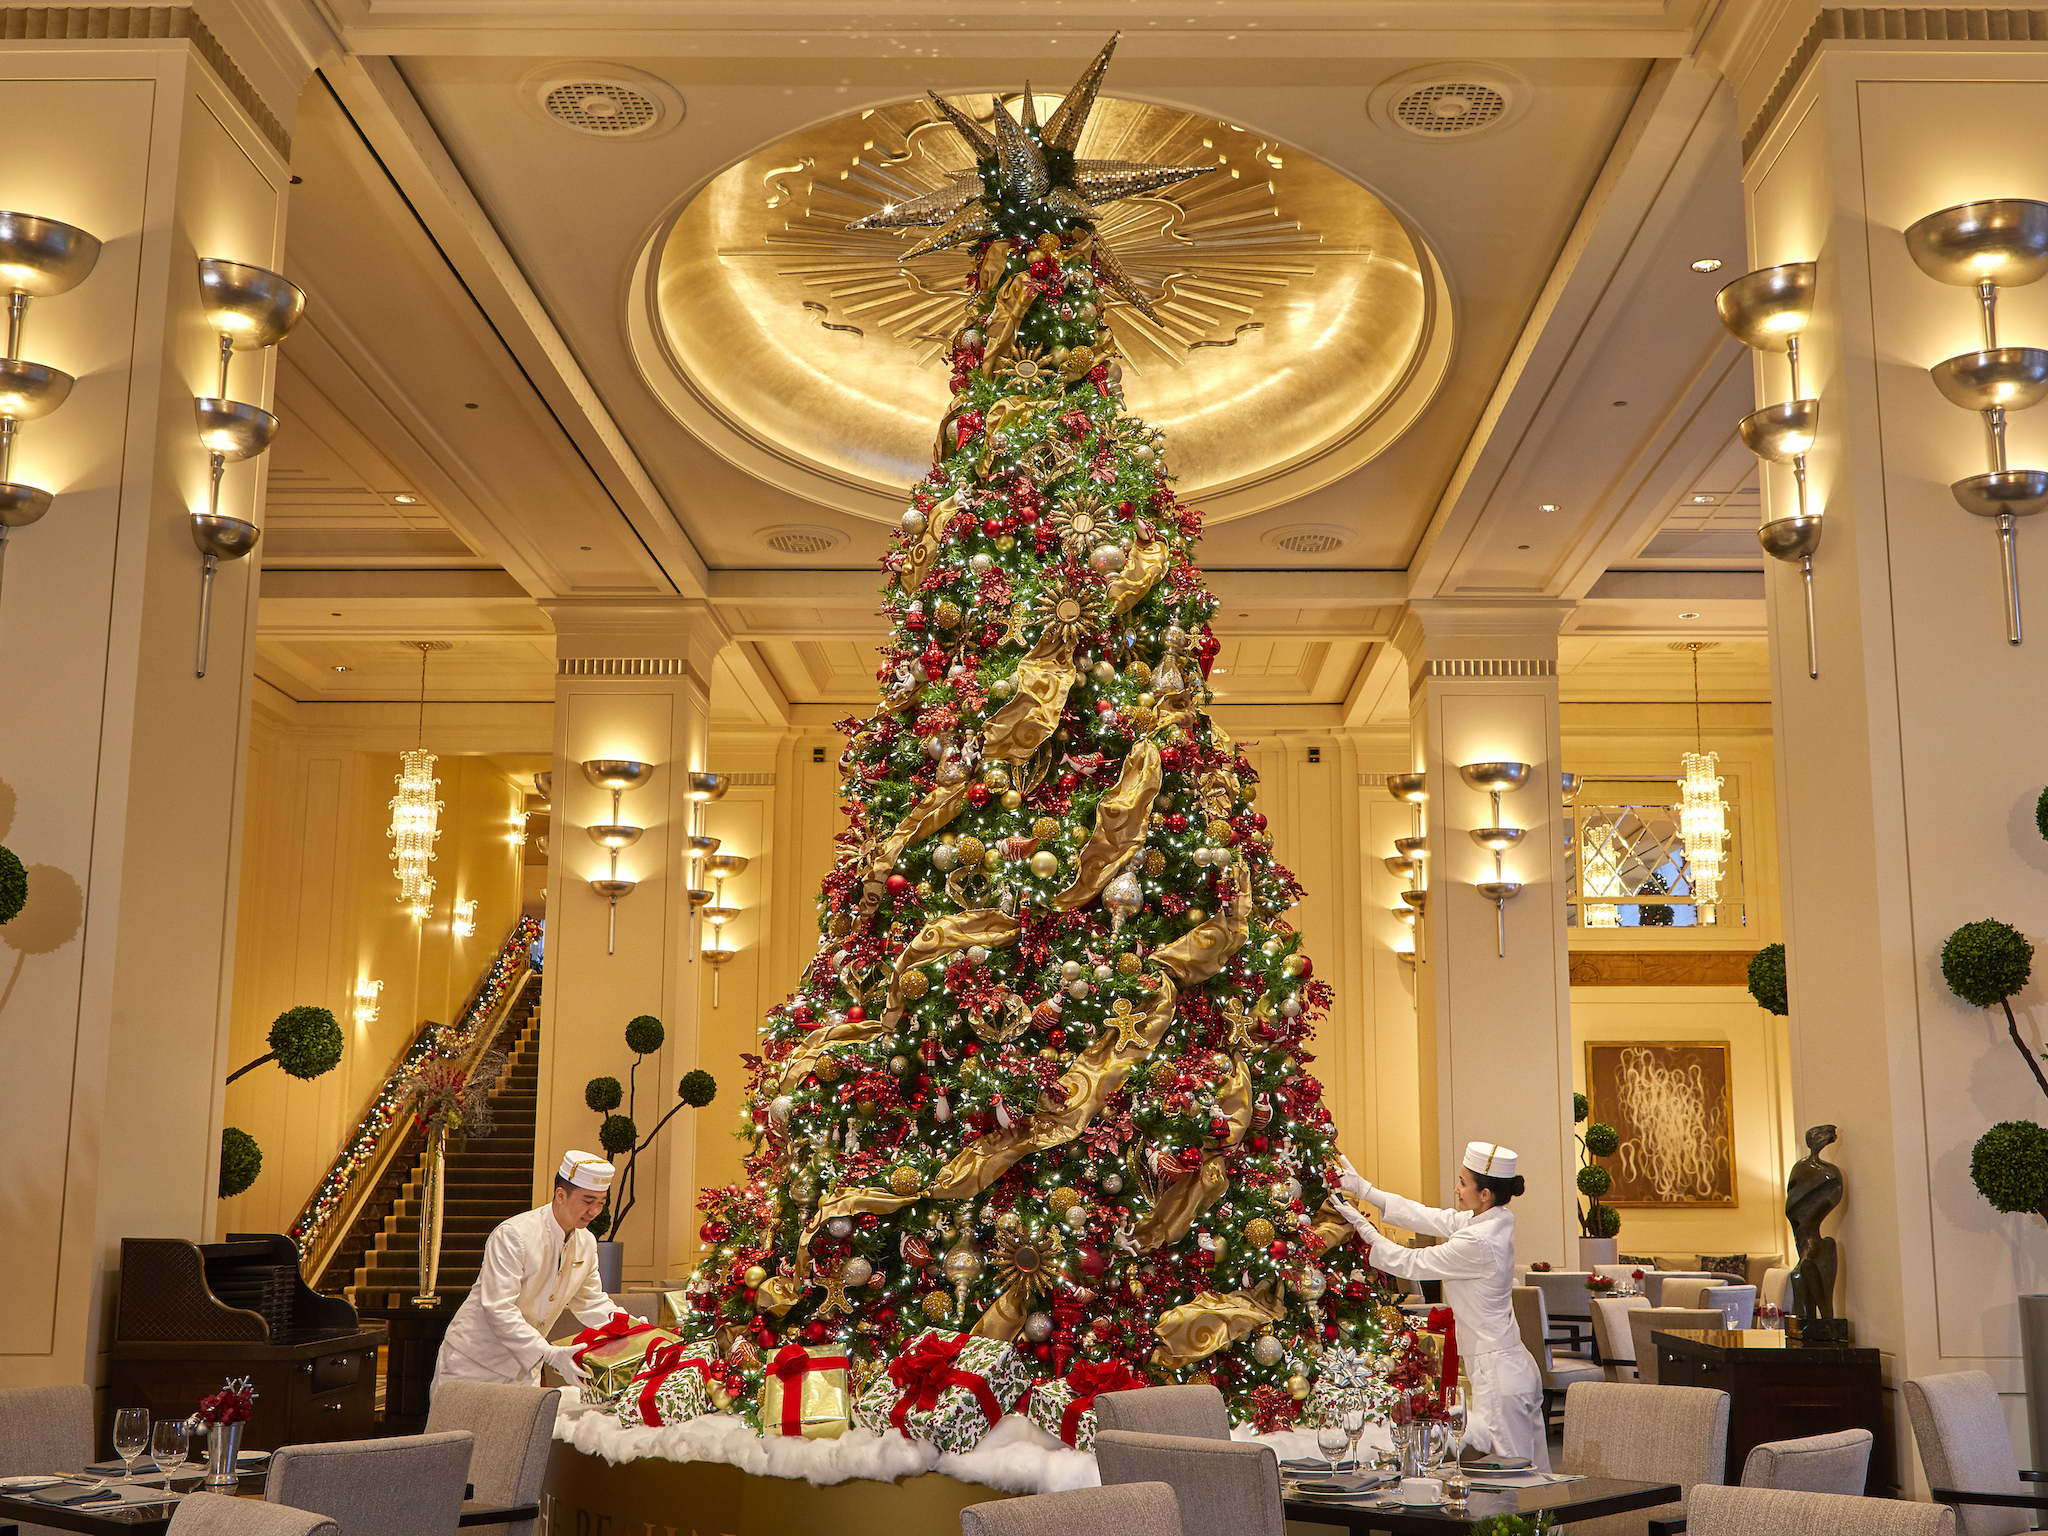 Christmas Inns to Visit in 2020 - Hotels With Great Christmas Packages